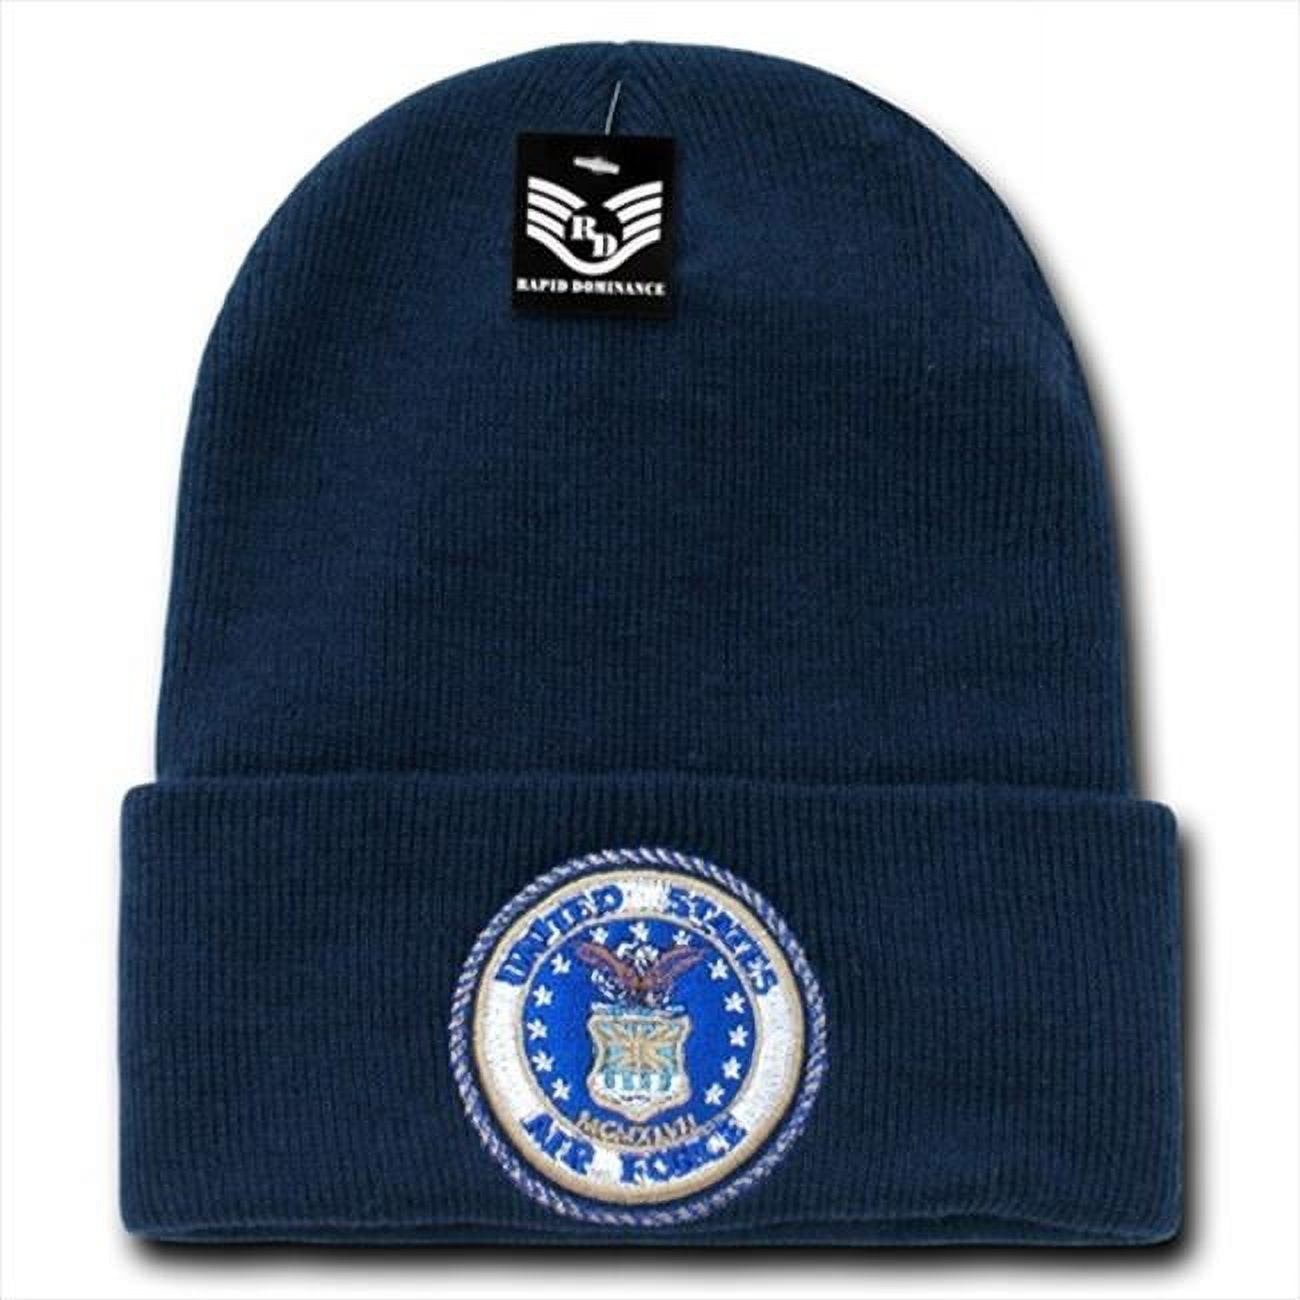 Rapid Dominance Air Force Emblem Military Long Cuff Mens Beanie Cap [Navy Blue] - image 1 of 7